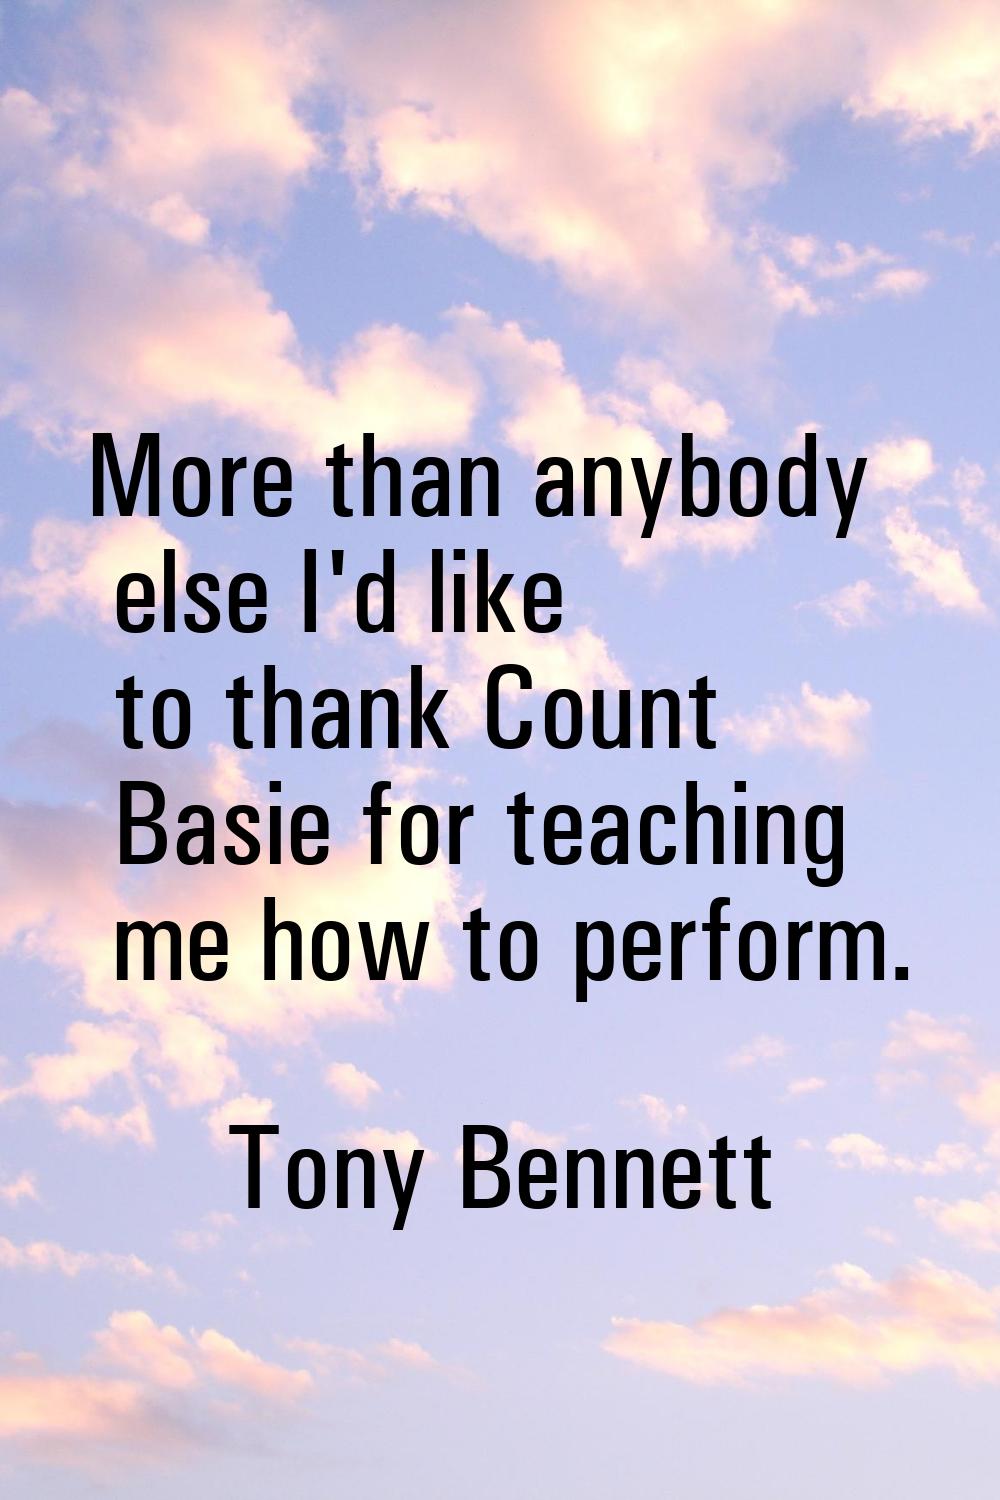 More than anybody else I'd like to thank Count Basie for teaching me how to perform.